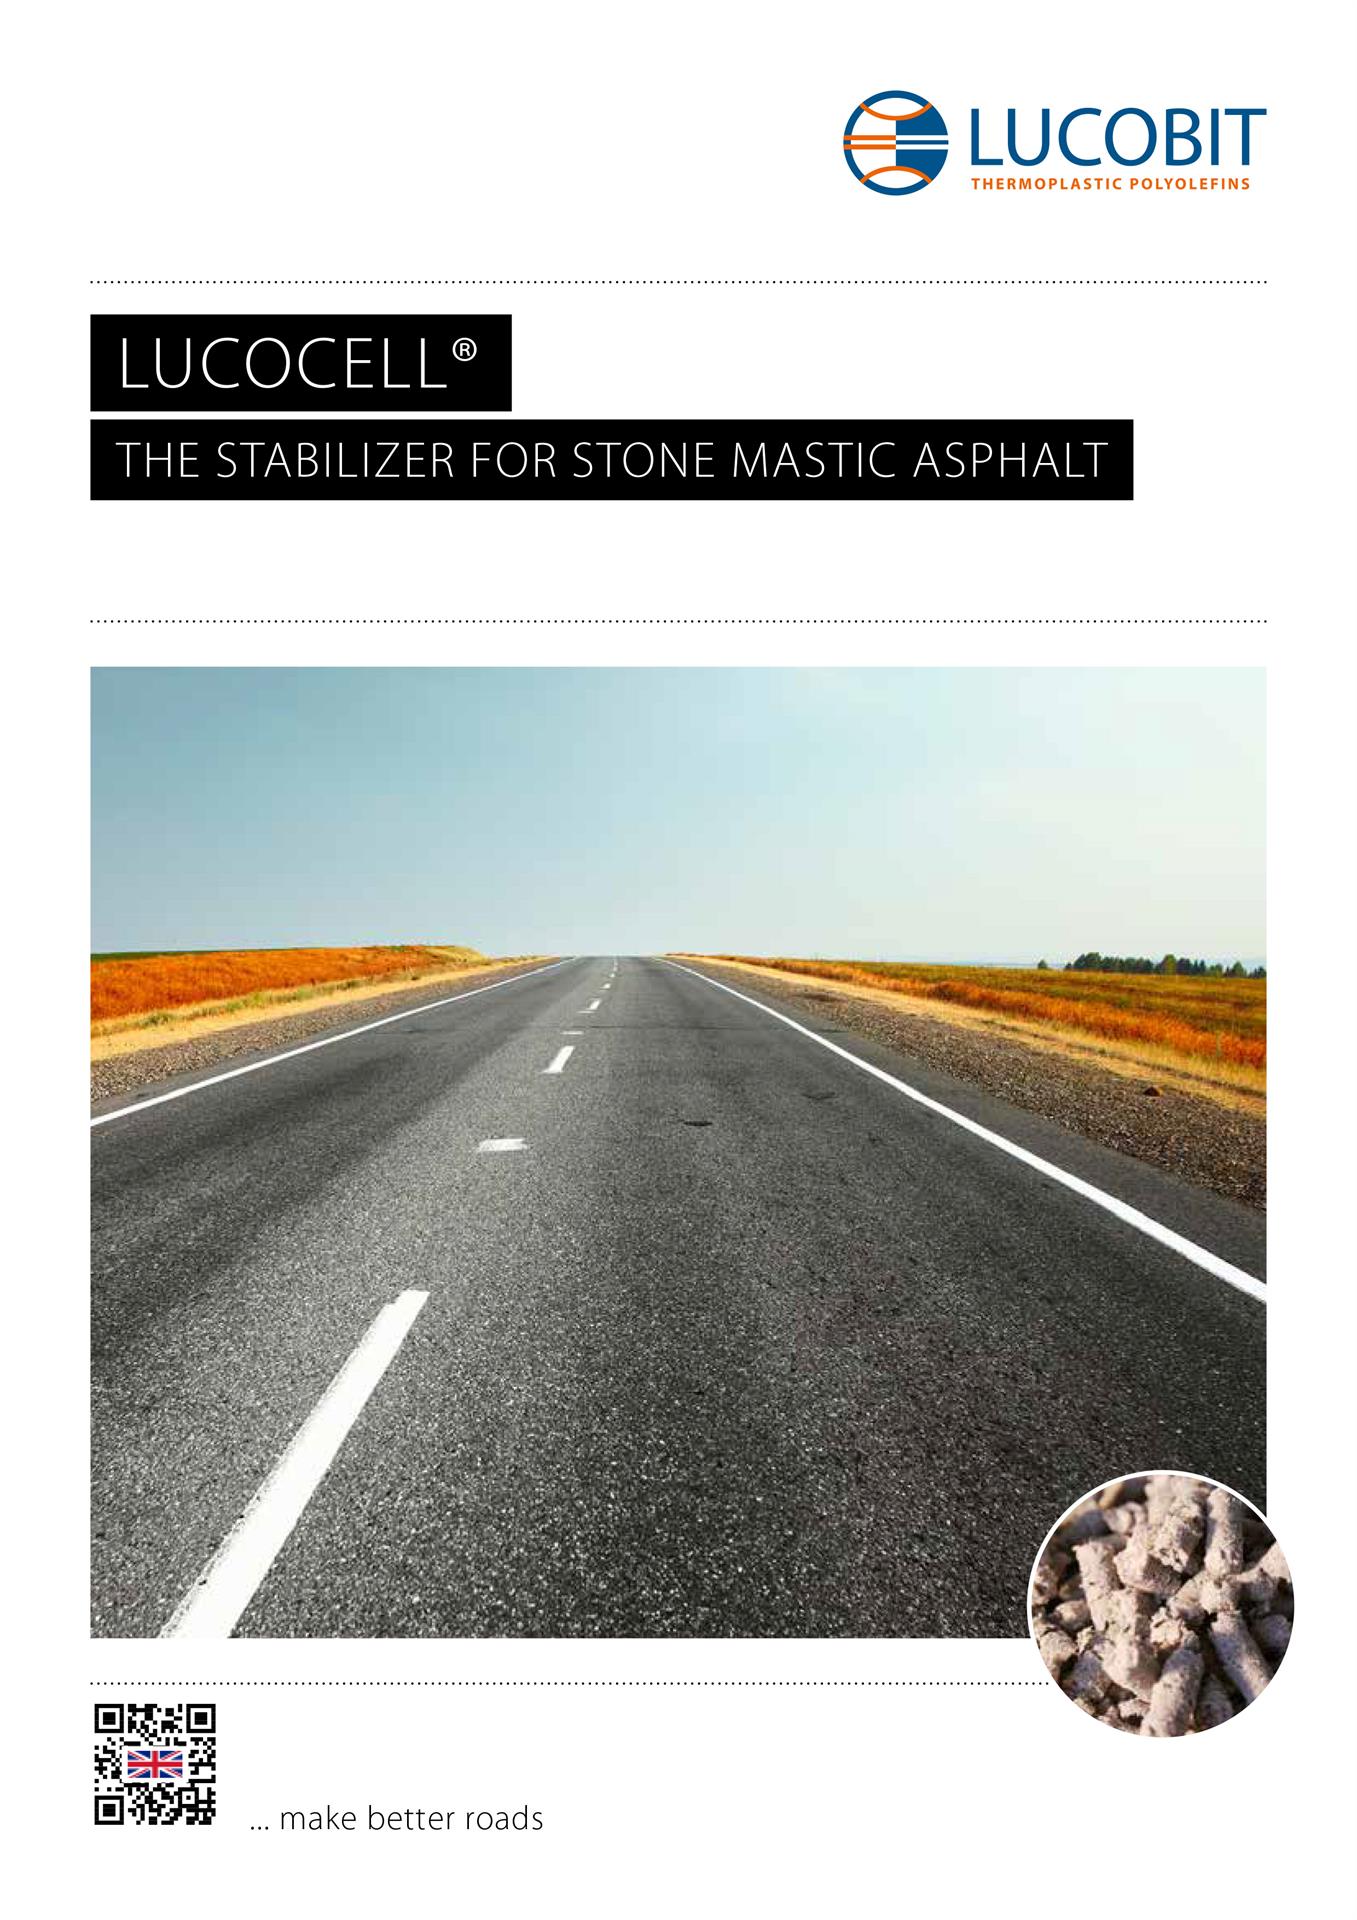 LUCOBIT Broschüre - LUCOCELL THE STABILIZER FOR STONE MASTIC ASPHALT